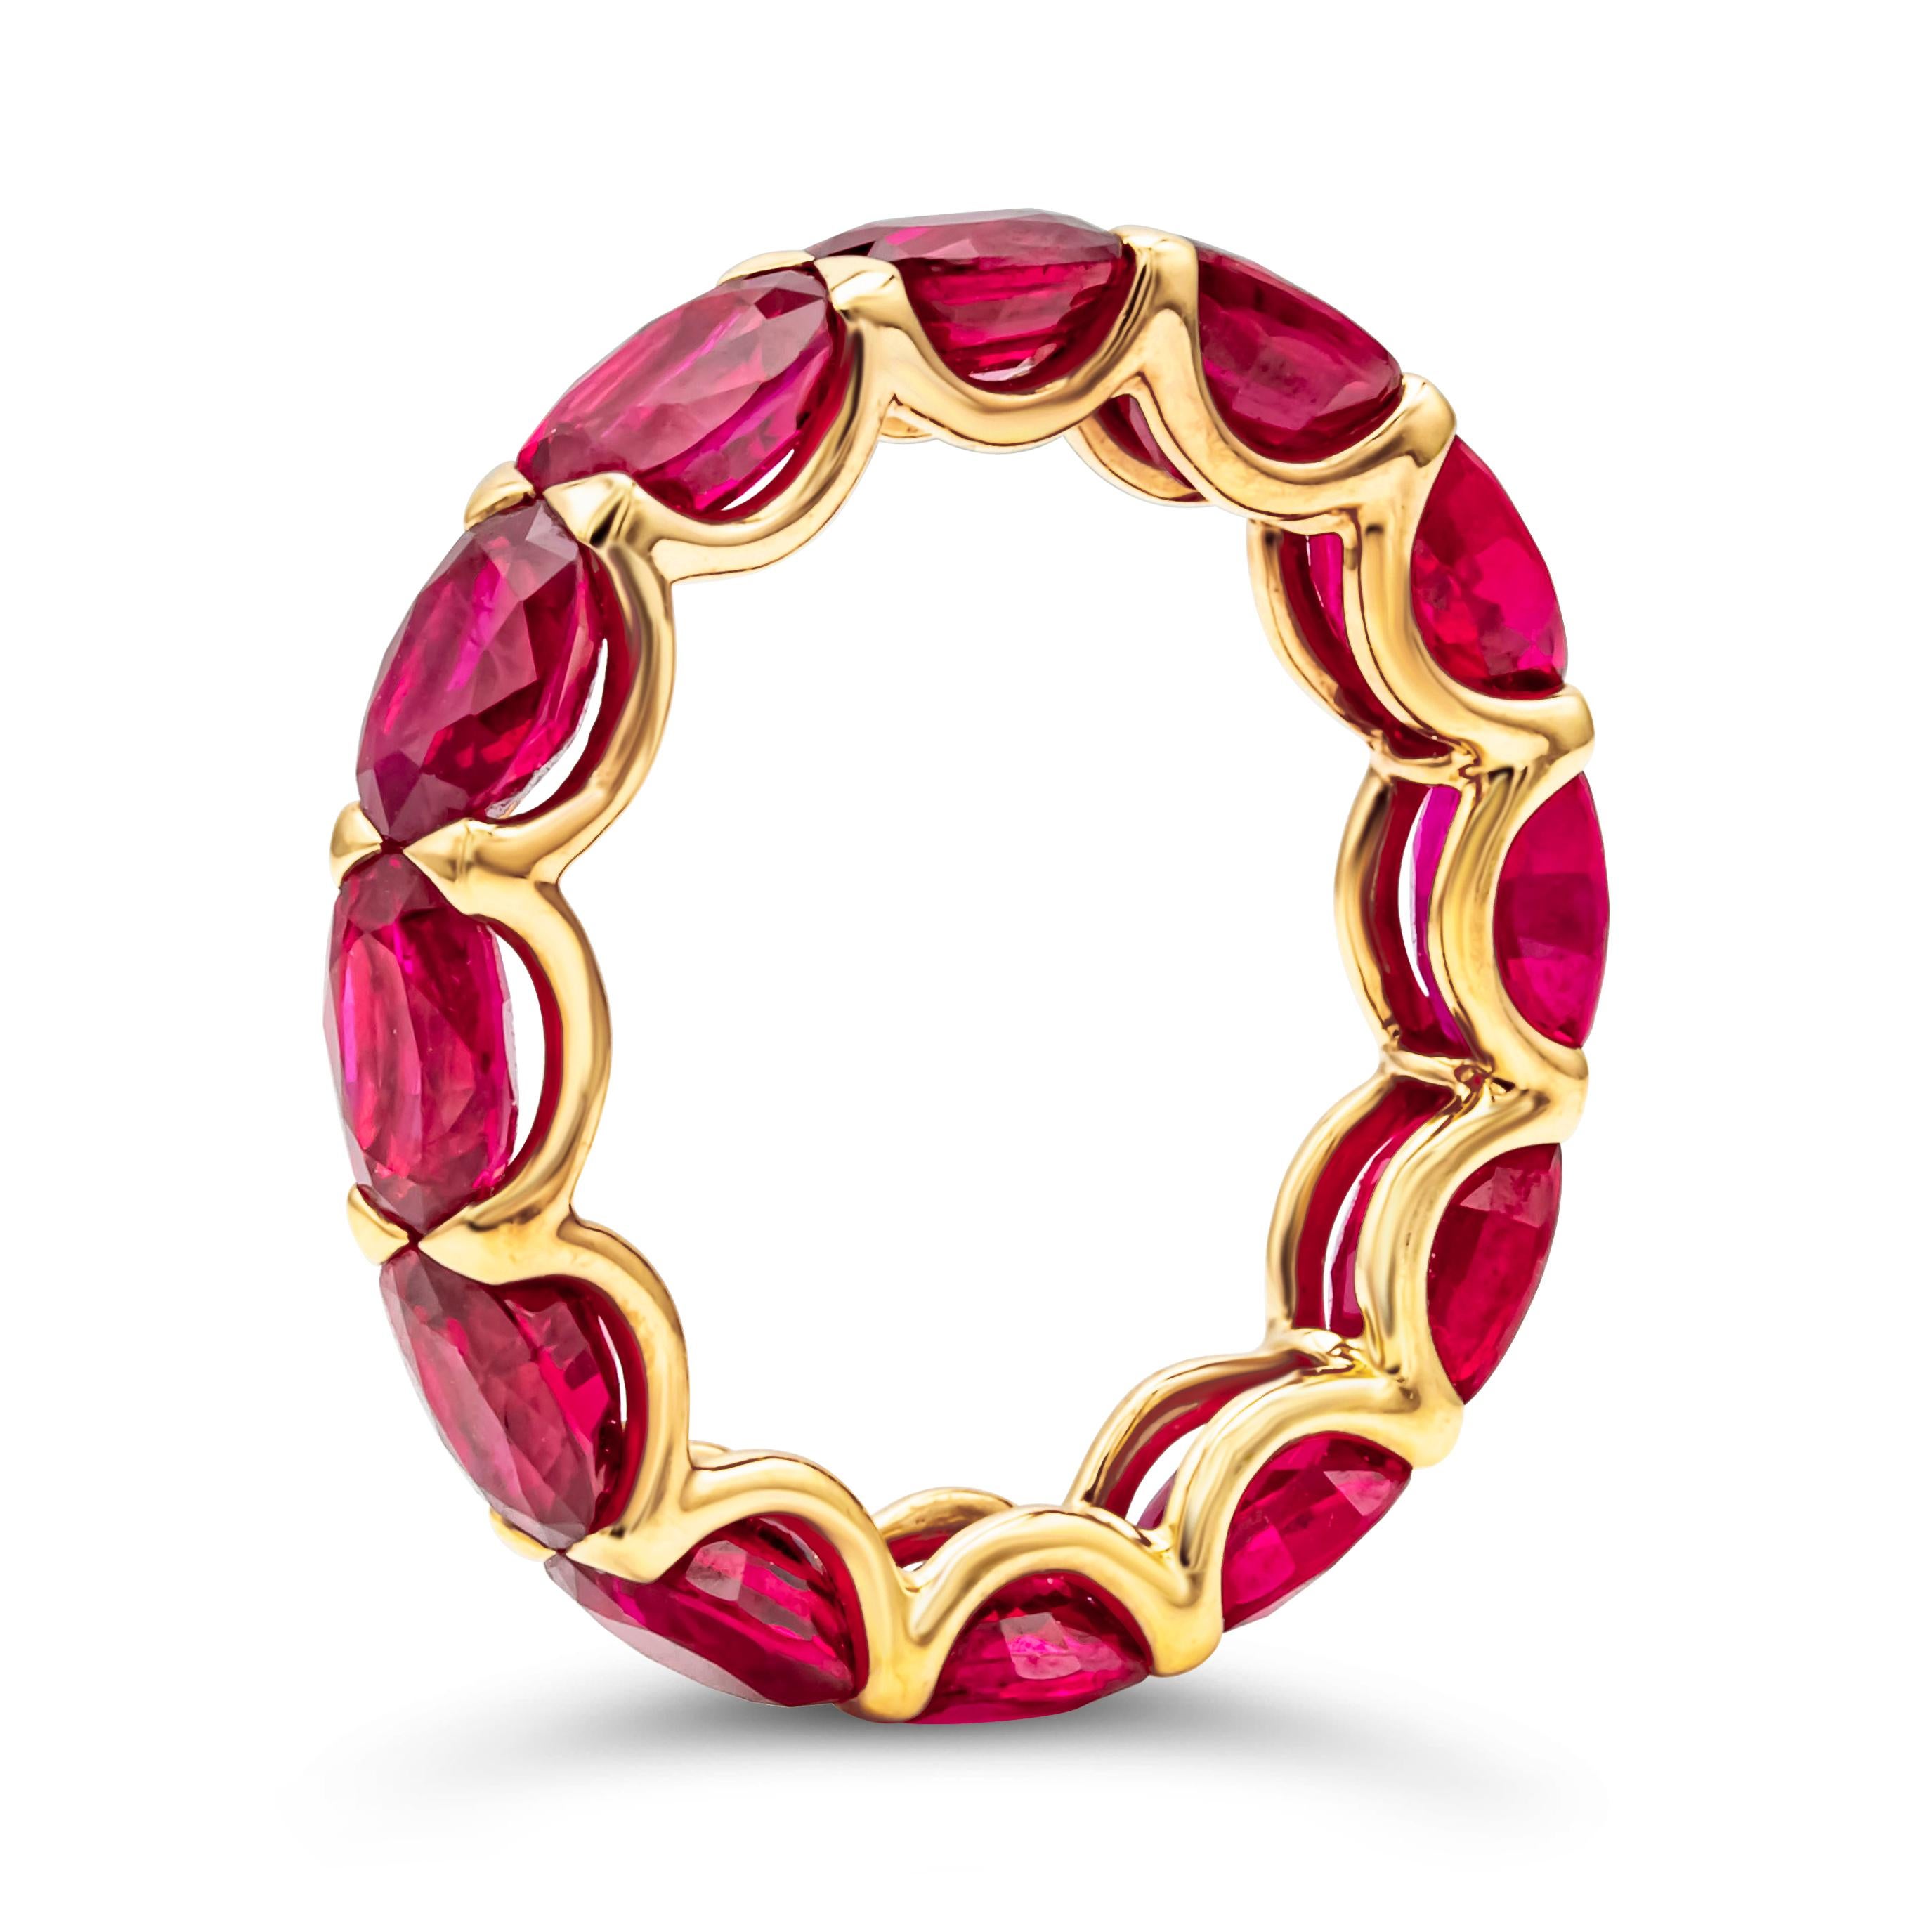 Contemporary Roman Malakov 7.43 Carats Total Oval Cut Ruby East-West Eternity Wedding Band For Sale